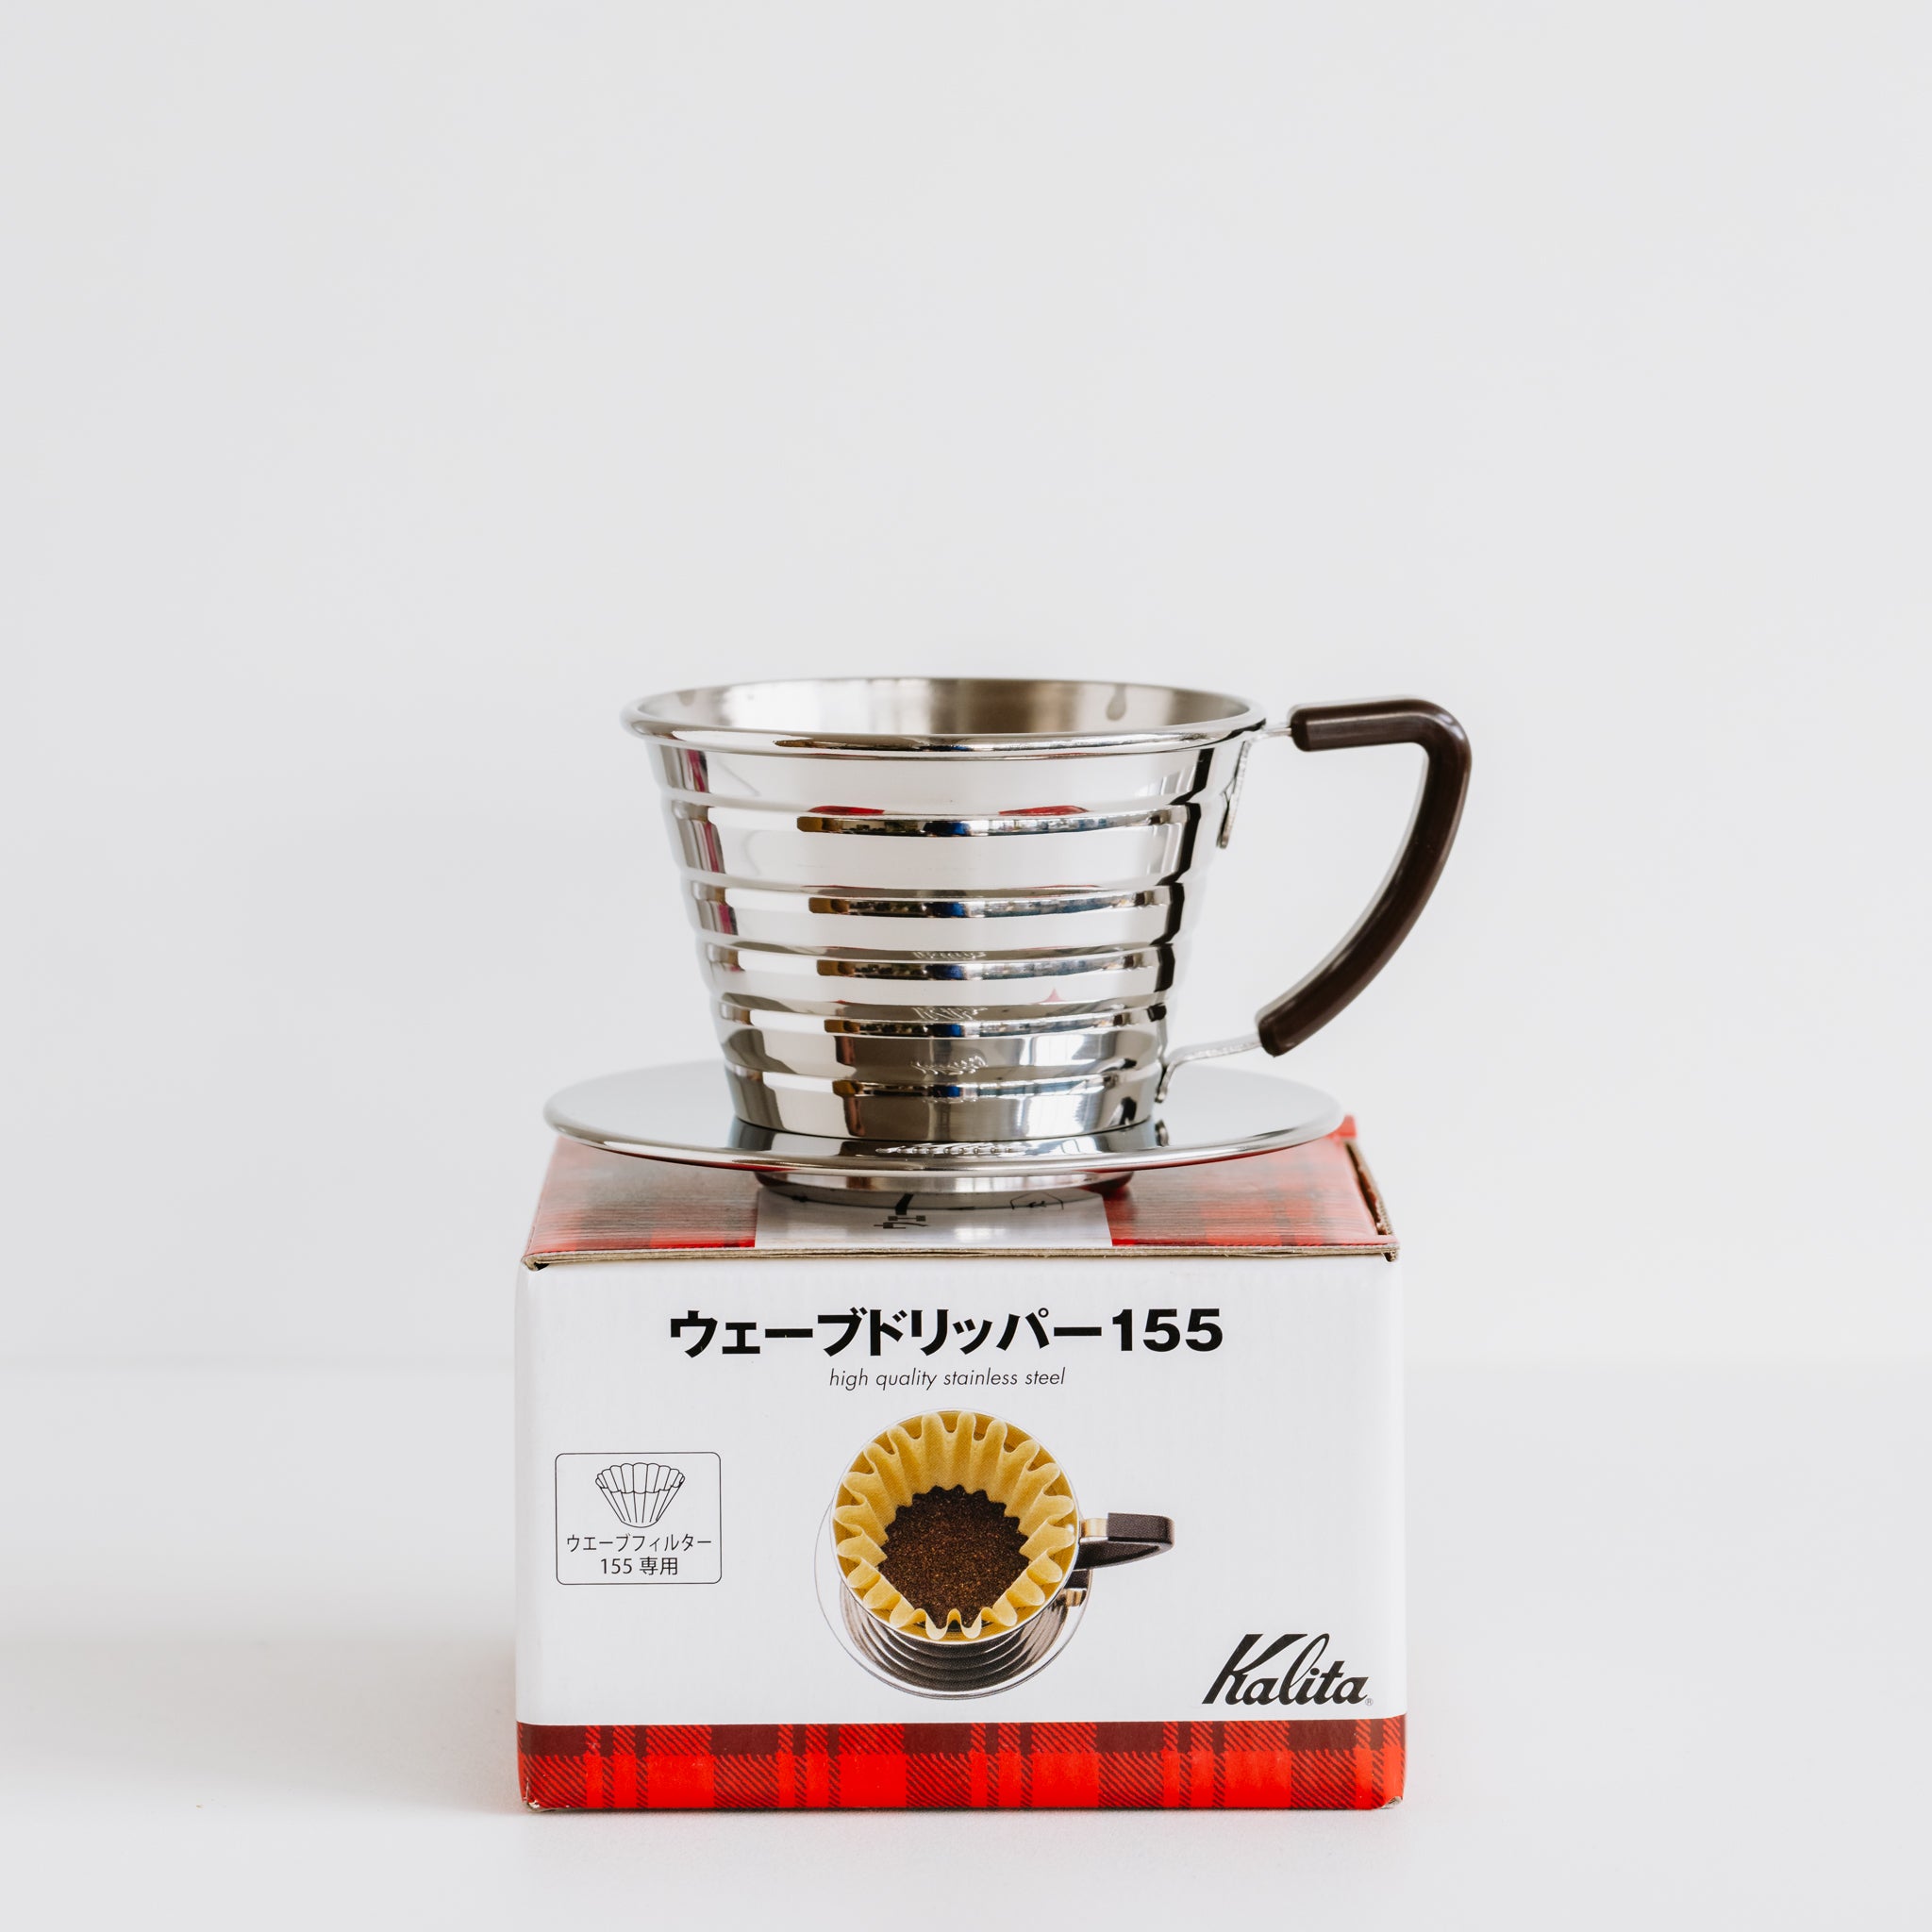 Kalita Wave 155 dripper on top of product box.